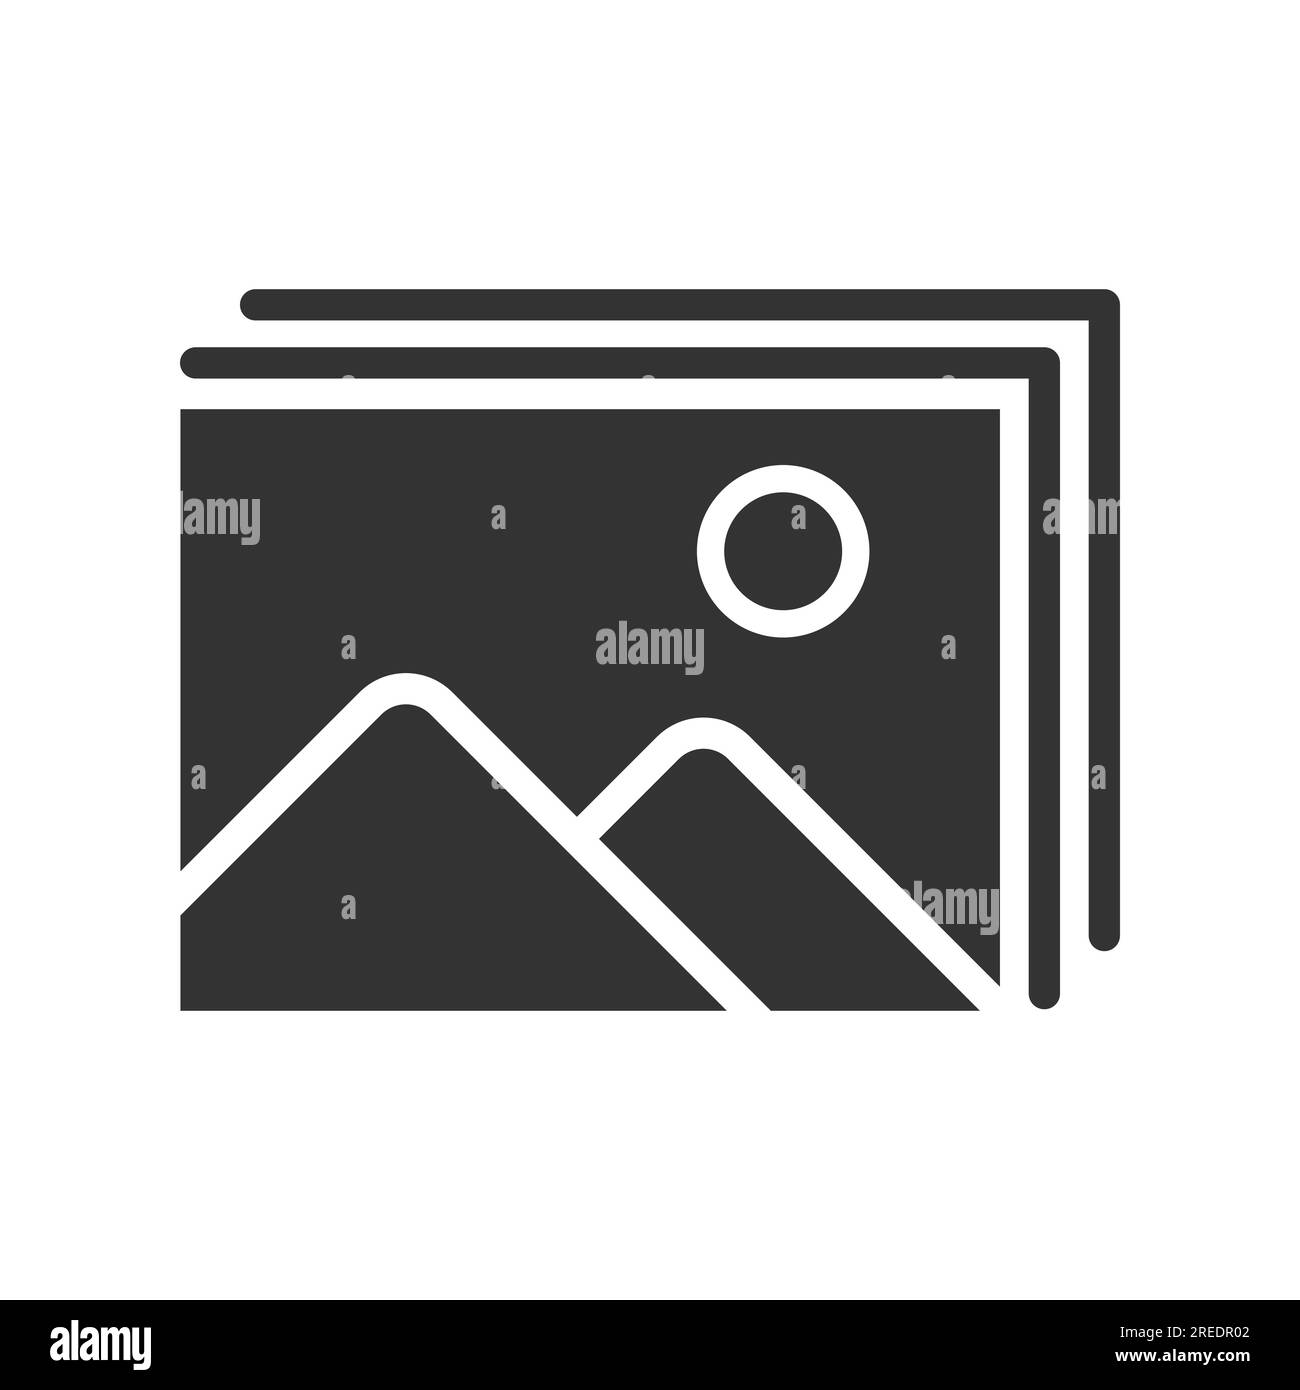 images vector icon isolated Stock Vector